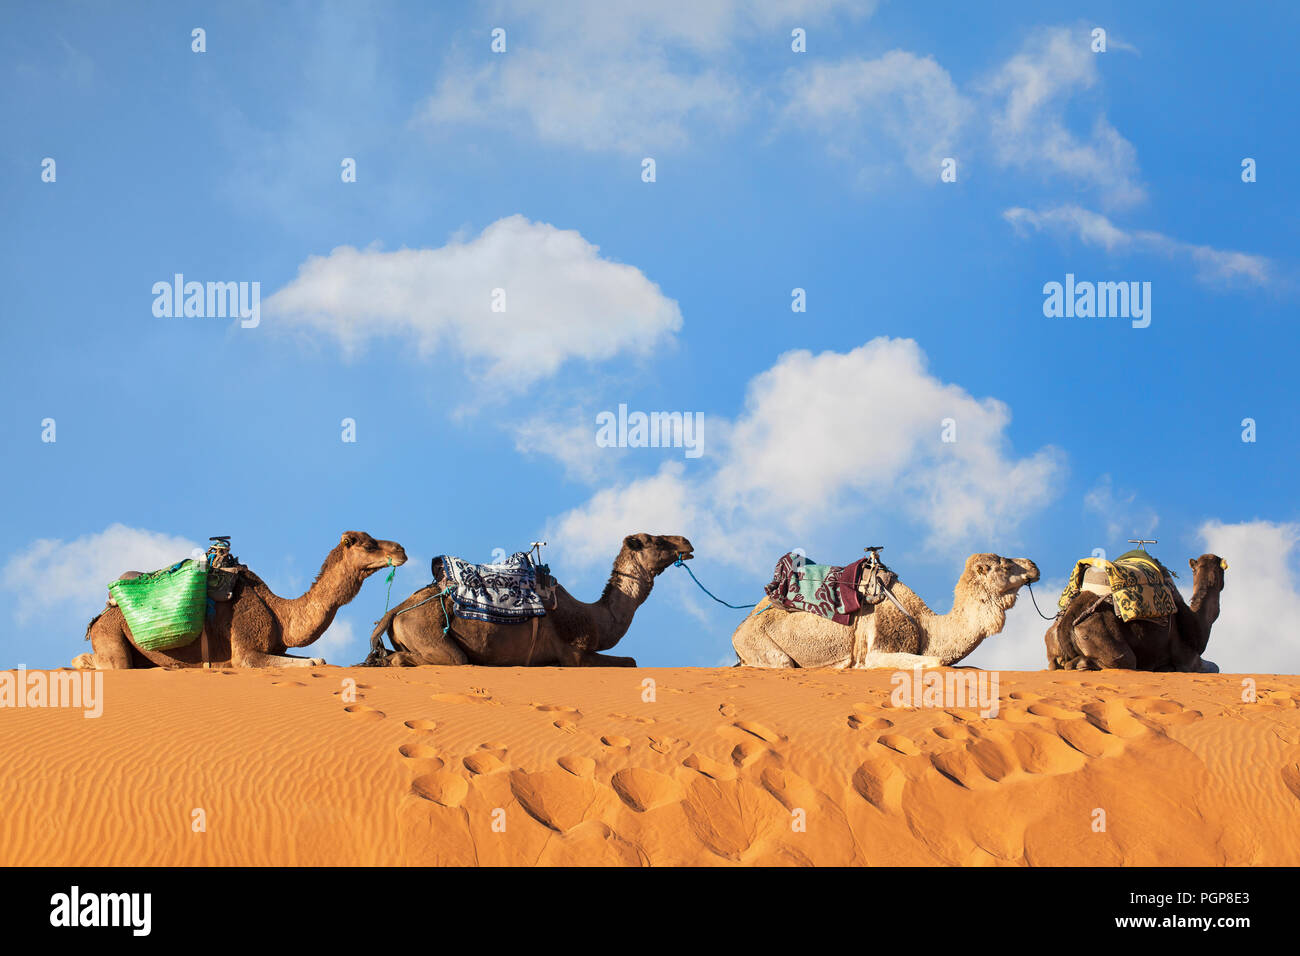 Camels with saddles sit in a row on a sandy ridge in the Sahara. Blue sky with puffy white clouds in the background. Close shot. Location: Morocco Stock Photo